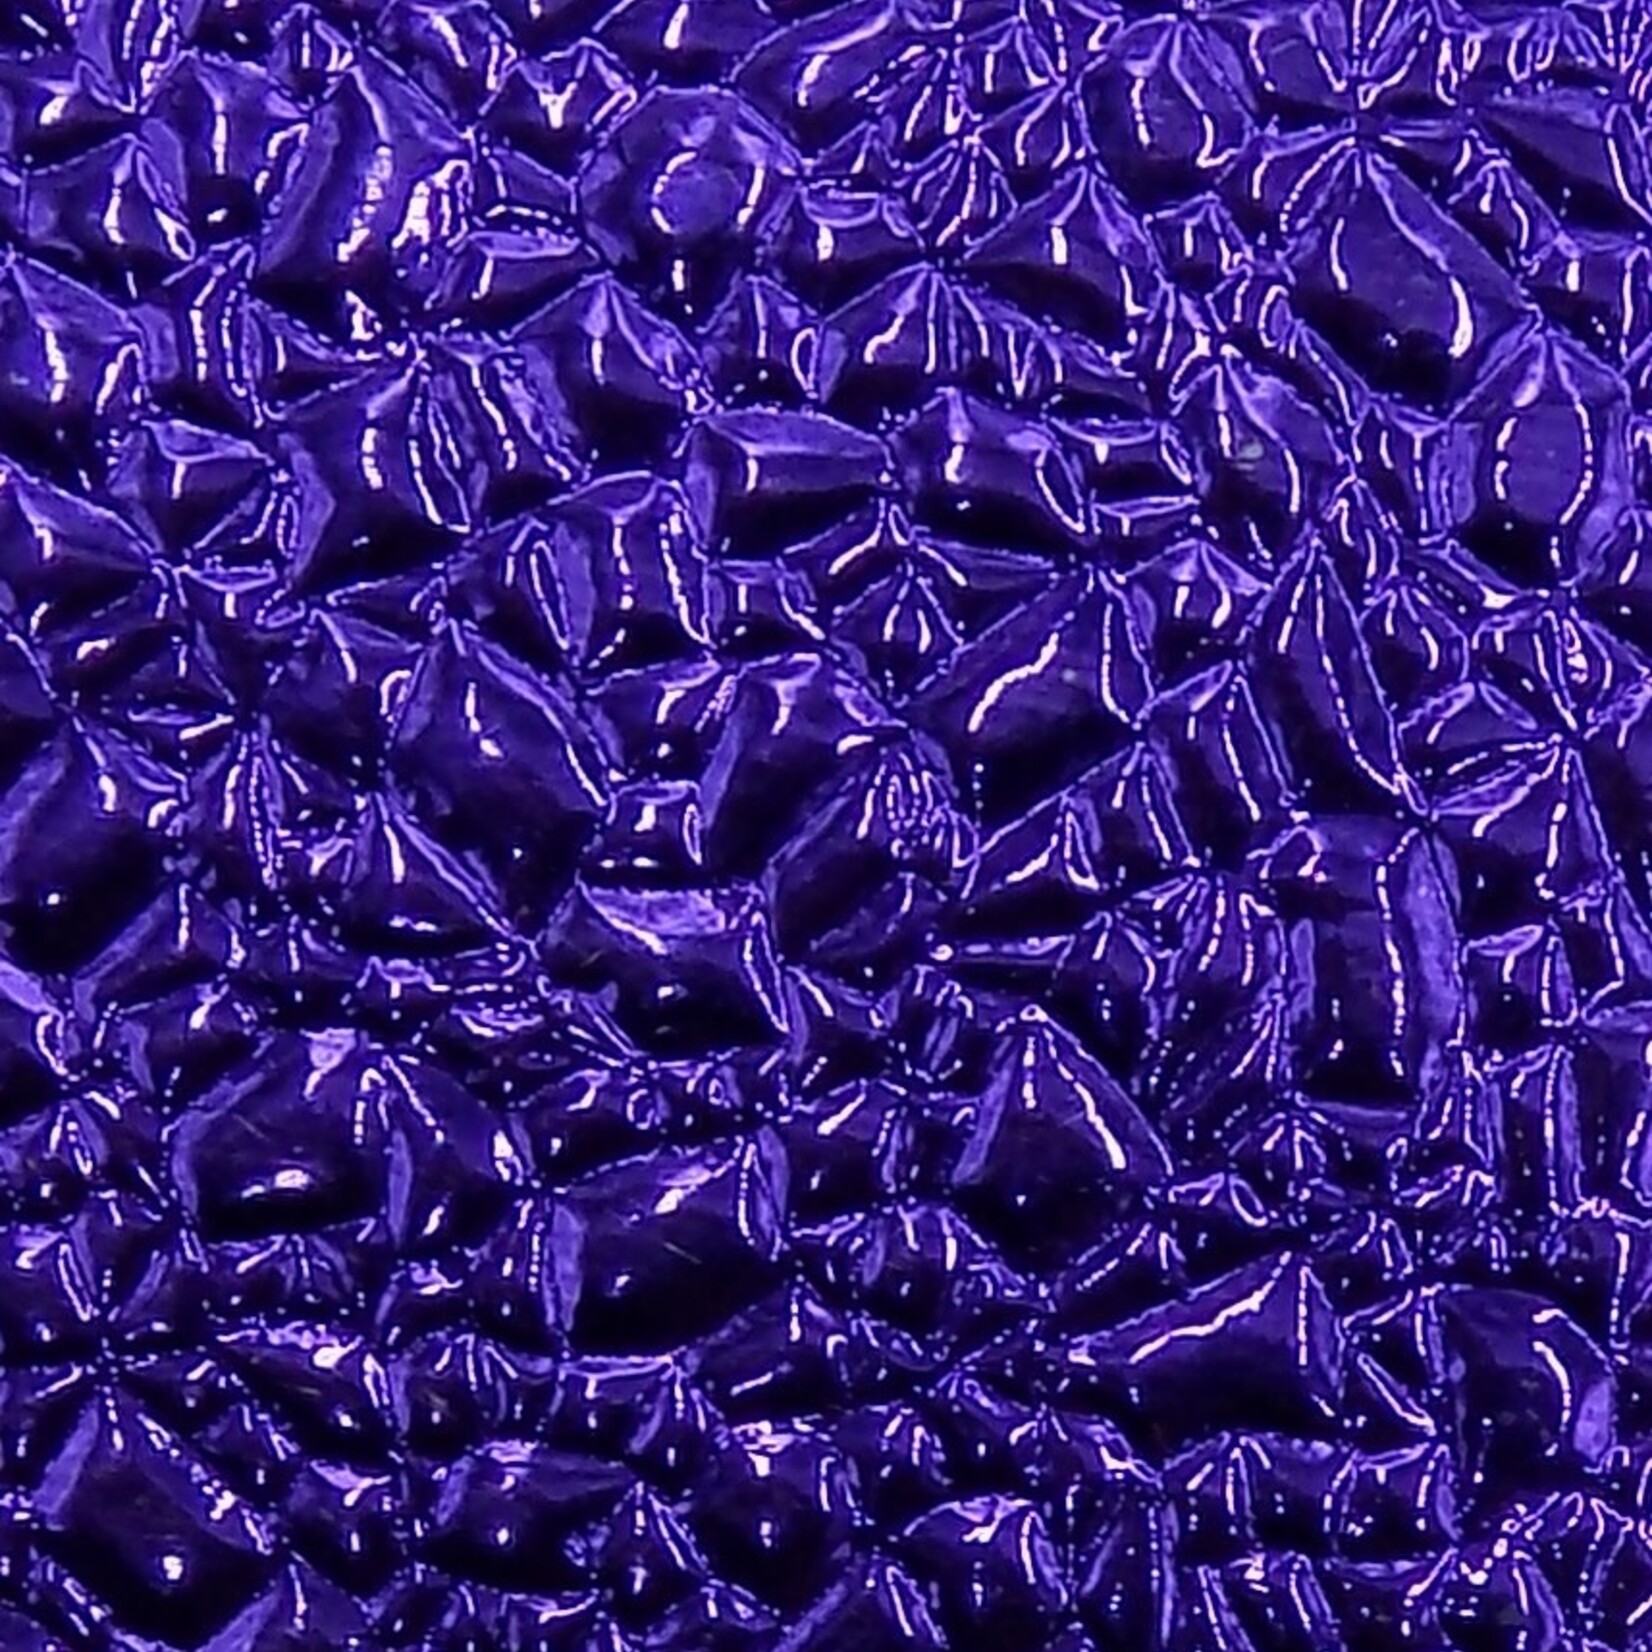 Pattern Cracked Ice Leatherette with Fleece Backing Purple